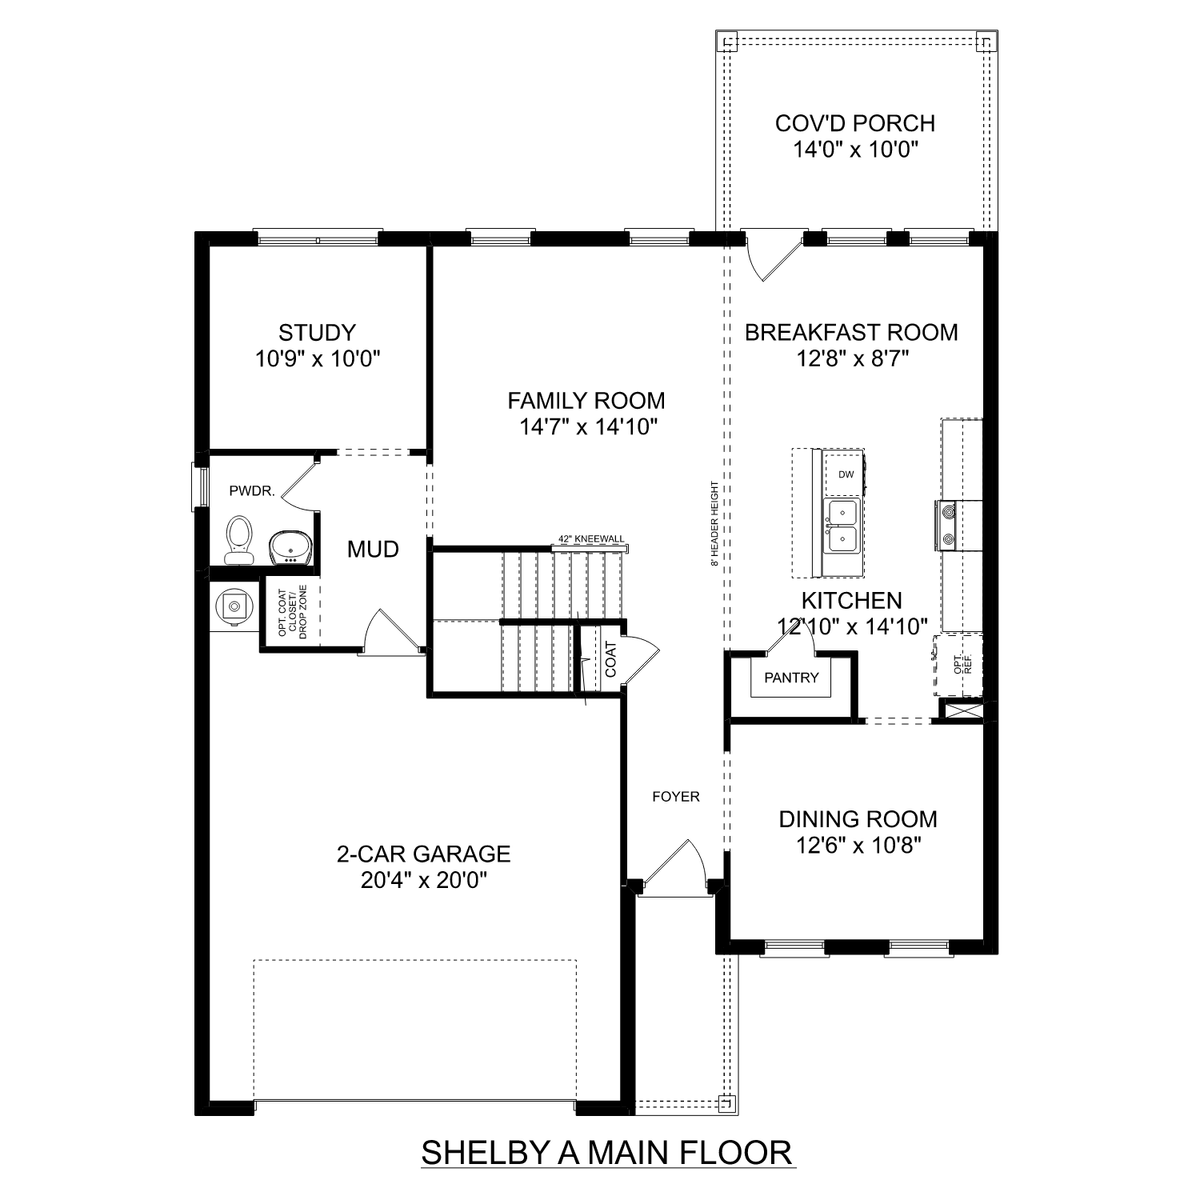 1 - The Shelby A buildable floor plan layout in Davidson Homes' Flint Meadows community.